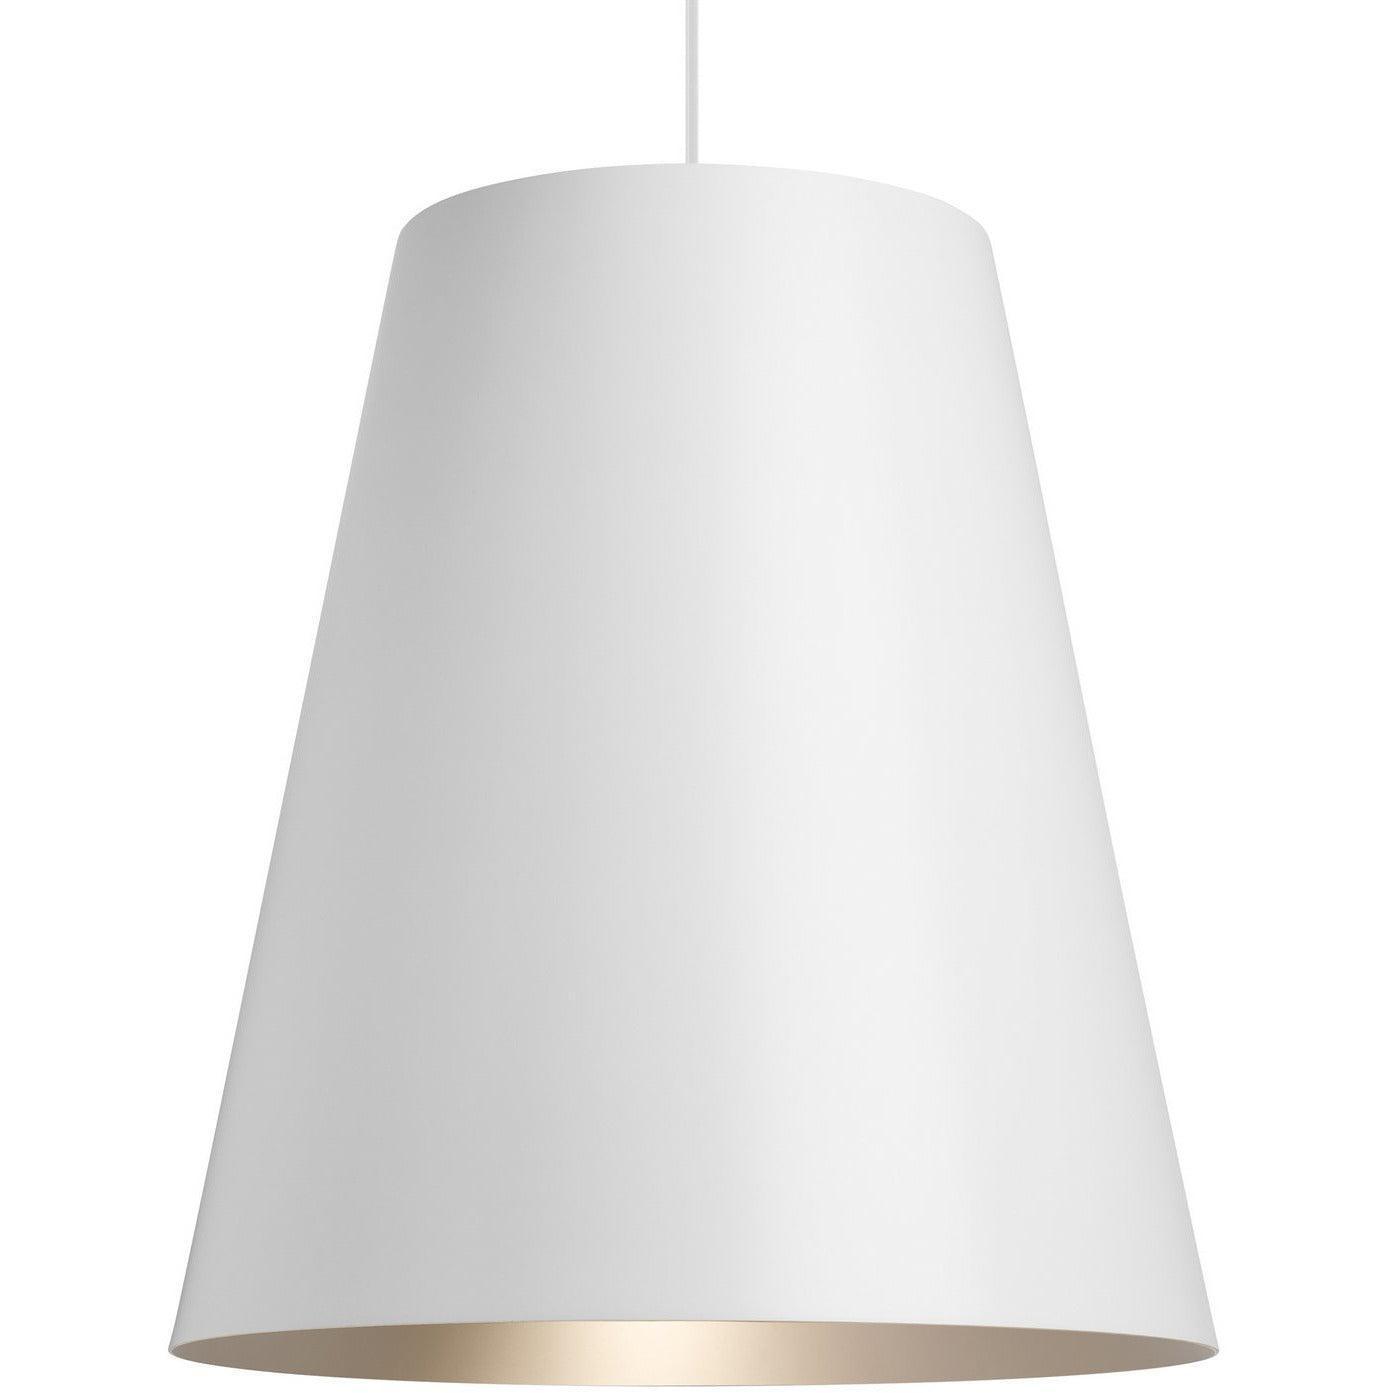 Montreal Lighting & Hardware - Gunnar Pendant by Visual Comfort Modern Collection | OPEN BOX - 700TDGUNPWS OB | Montreal Lighting & Hardware